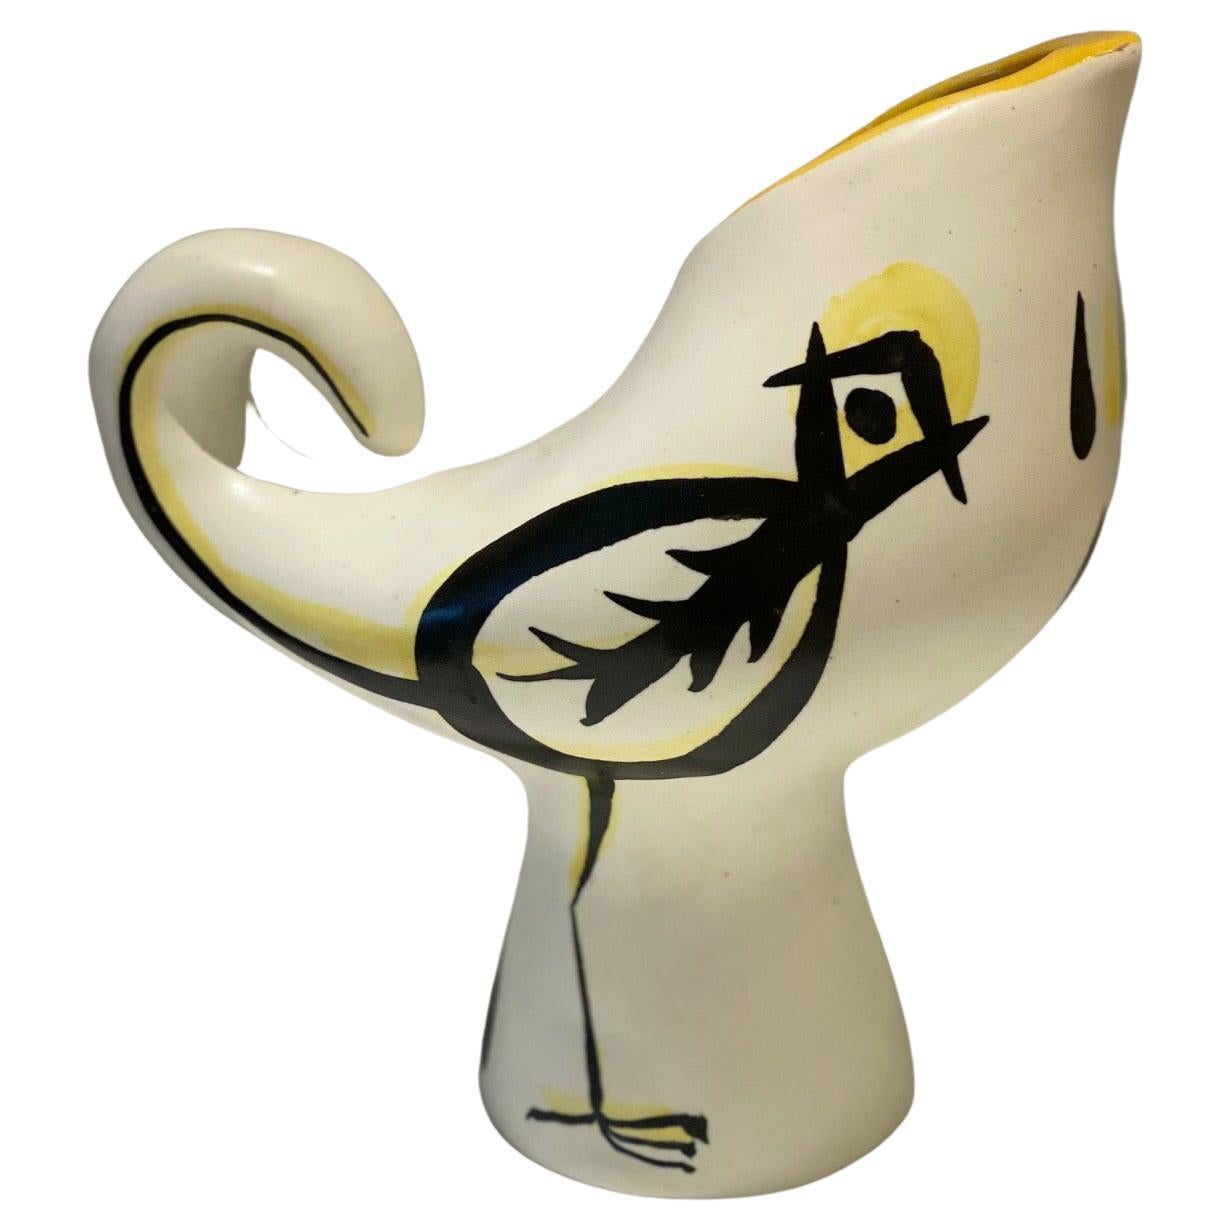 Ceramic Bird Pitcher Vase Signed by Roger Capron, Vallauris, 1950s